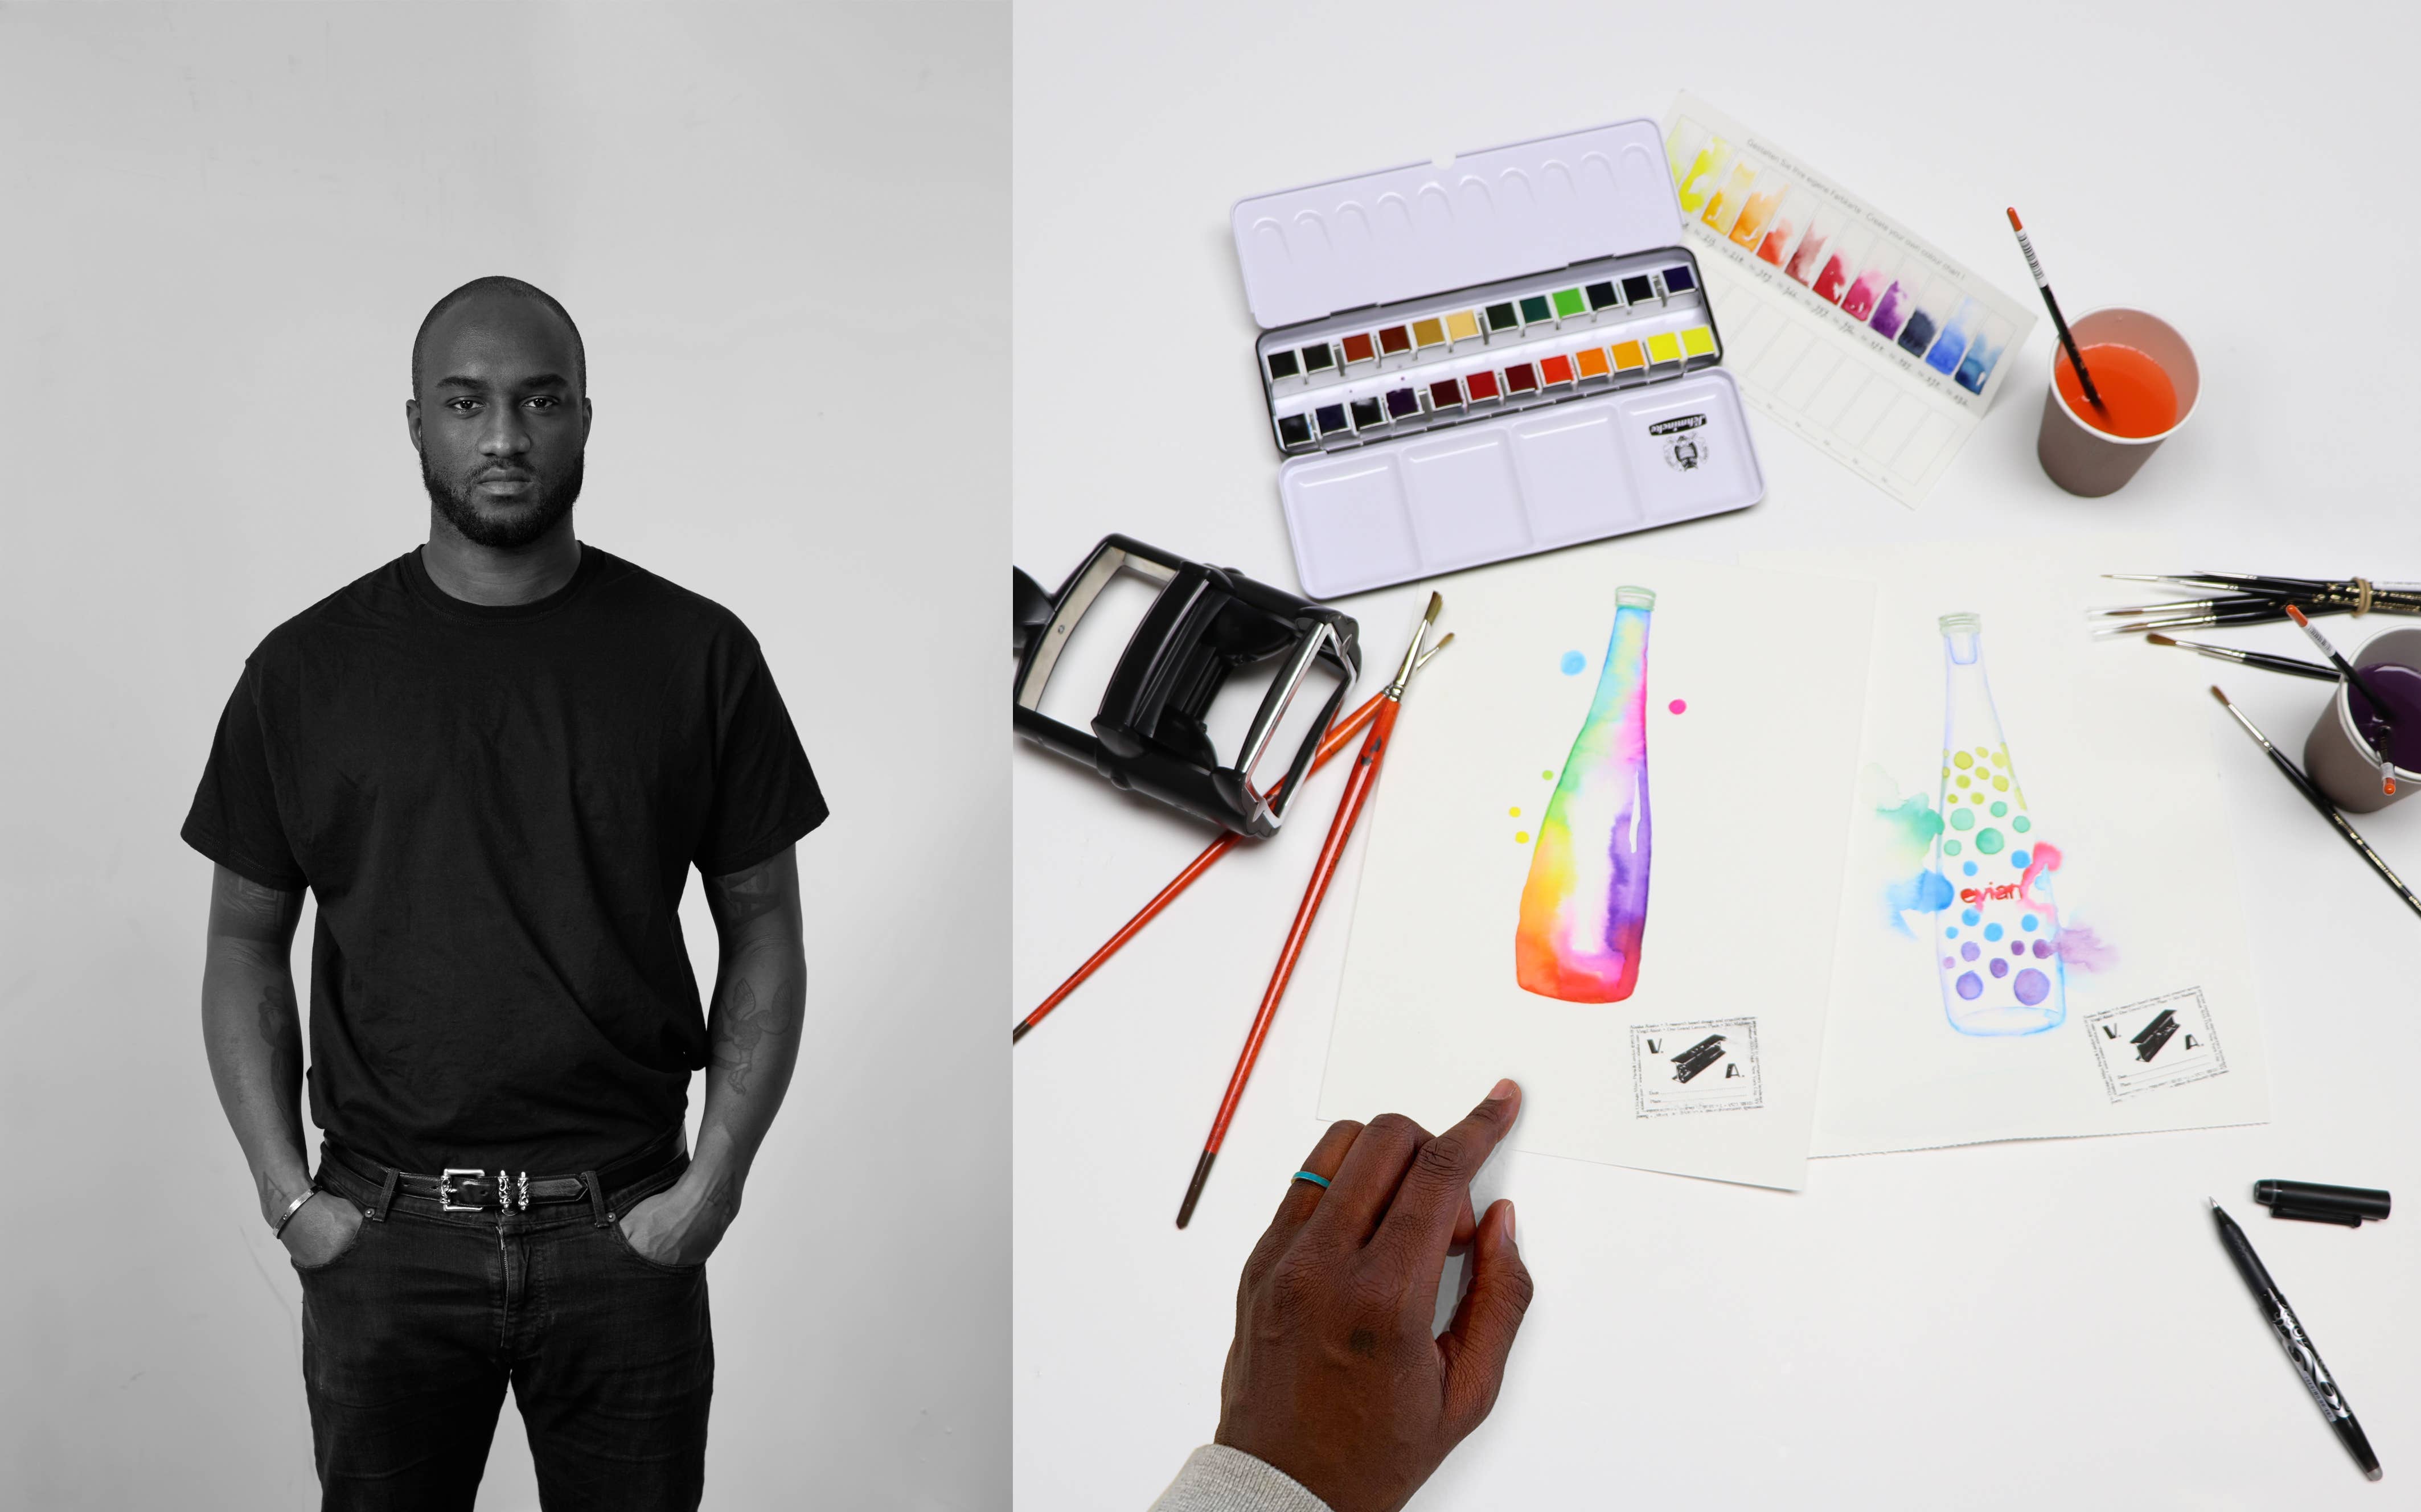 Virgil Abloh is working on a new project with Evian